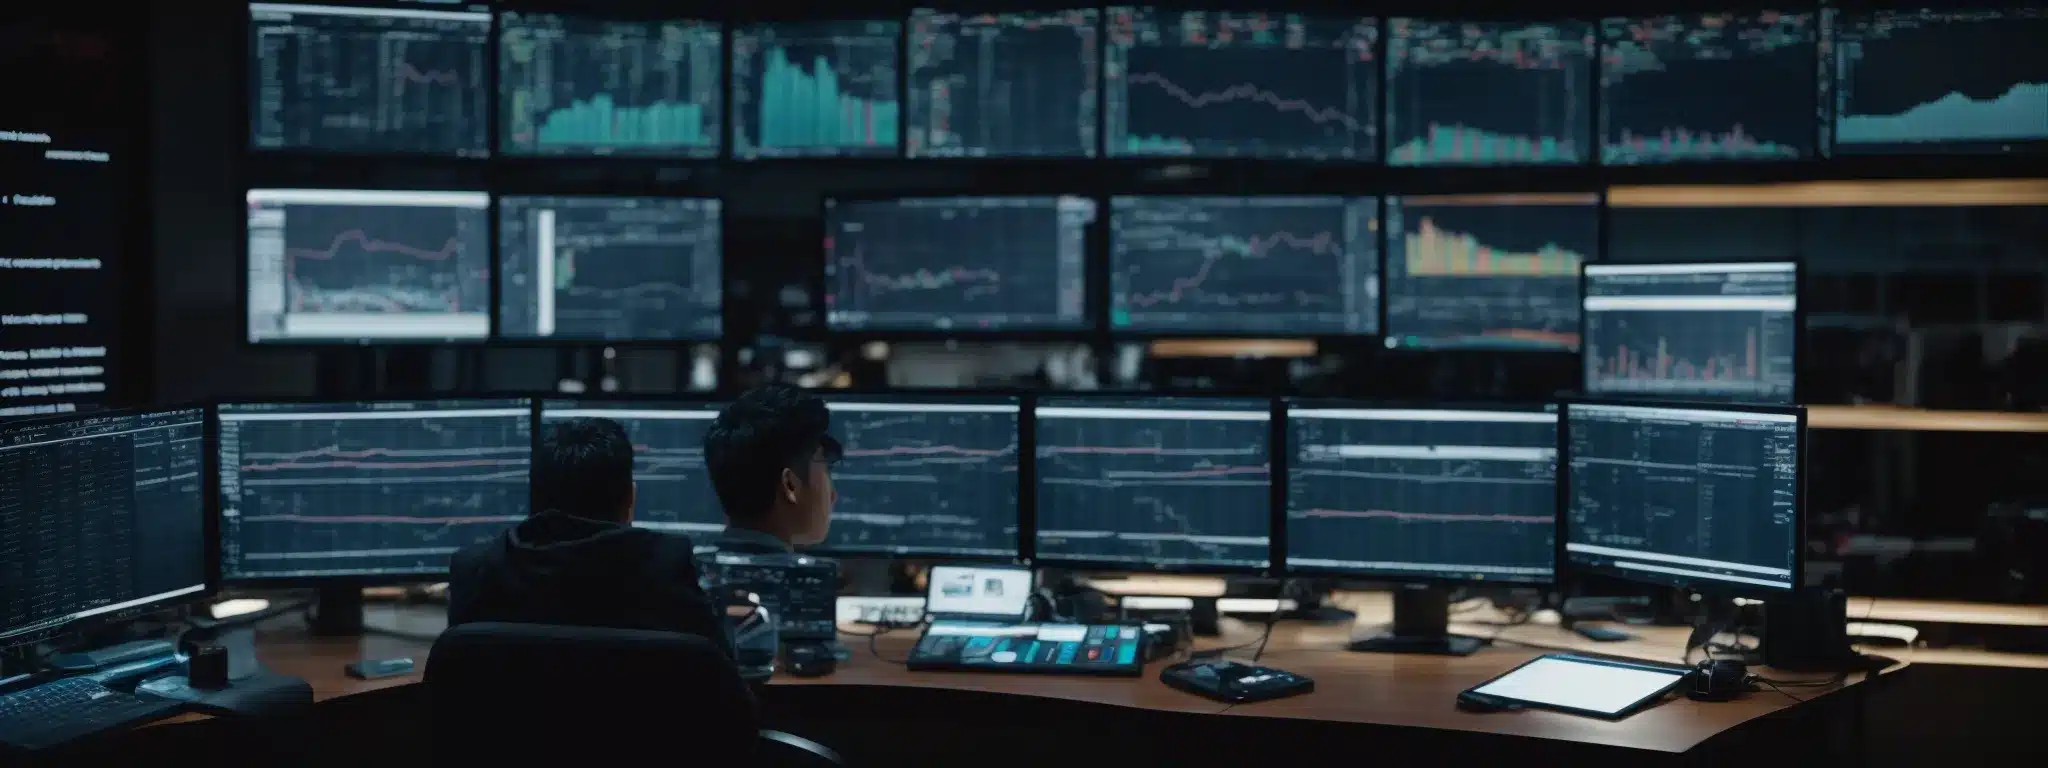 A Computer Programmer Gazes Intently At A Multi-Monitor Setup, Analyzing Complex Data And Digital Marketing Dashboards.